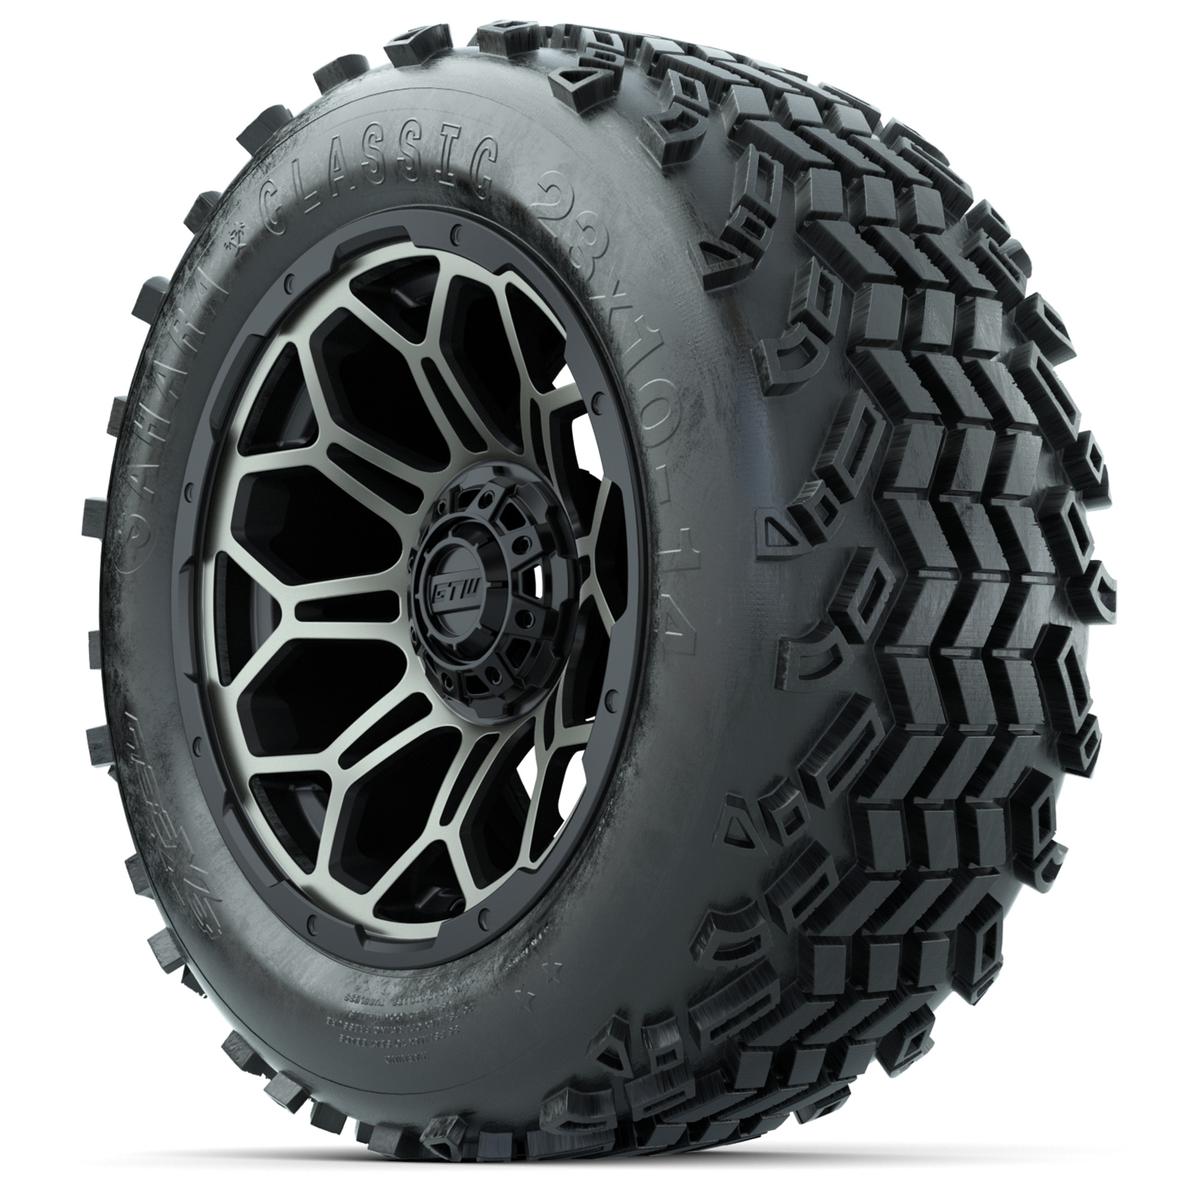 Set of (4) 14 in GTW Bravo Wheels with 23x10-14 Sahara Classic All-Terrain Tires